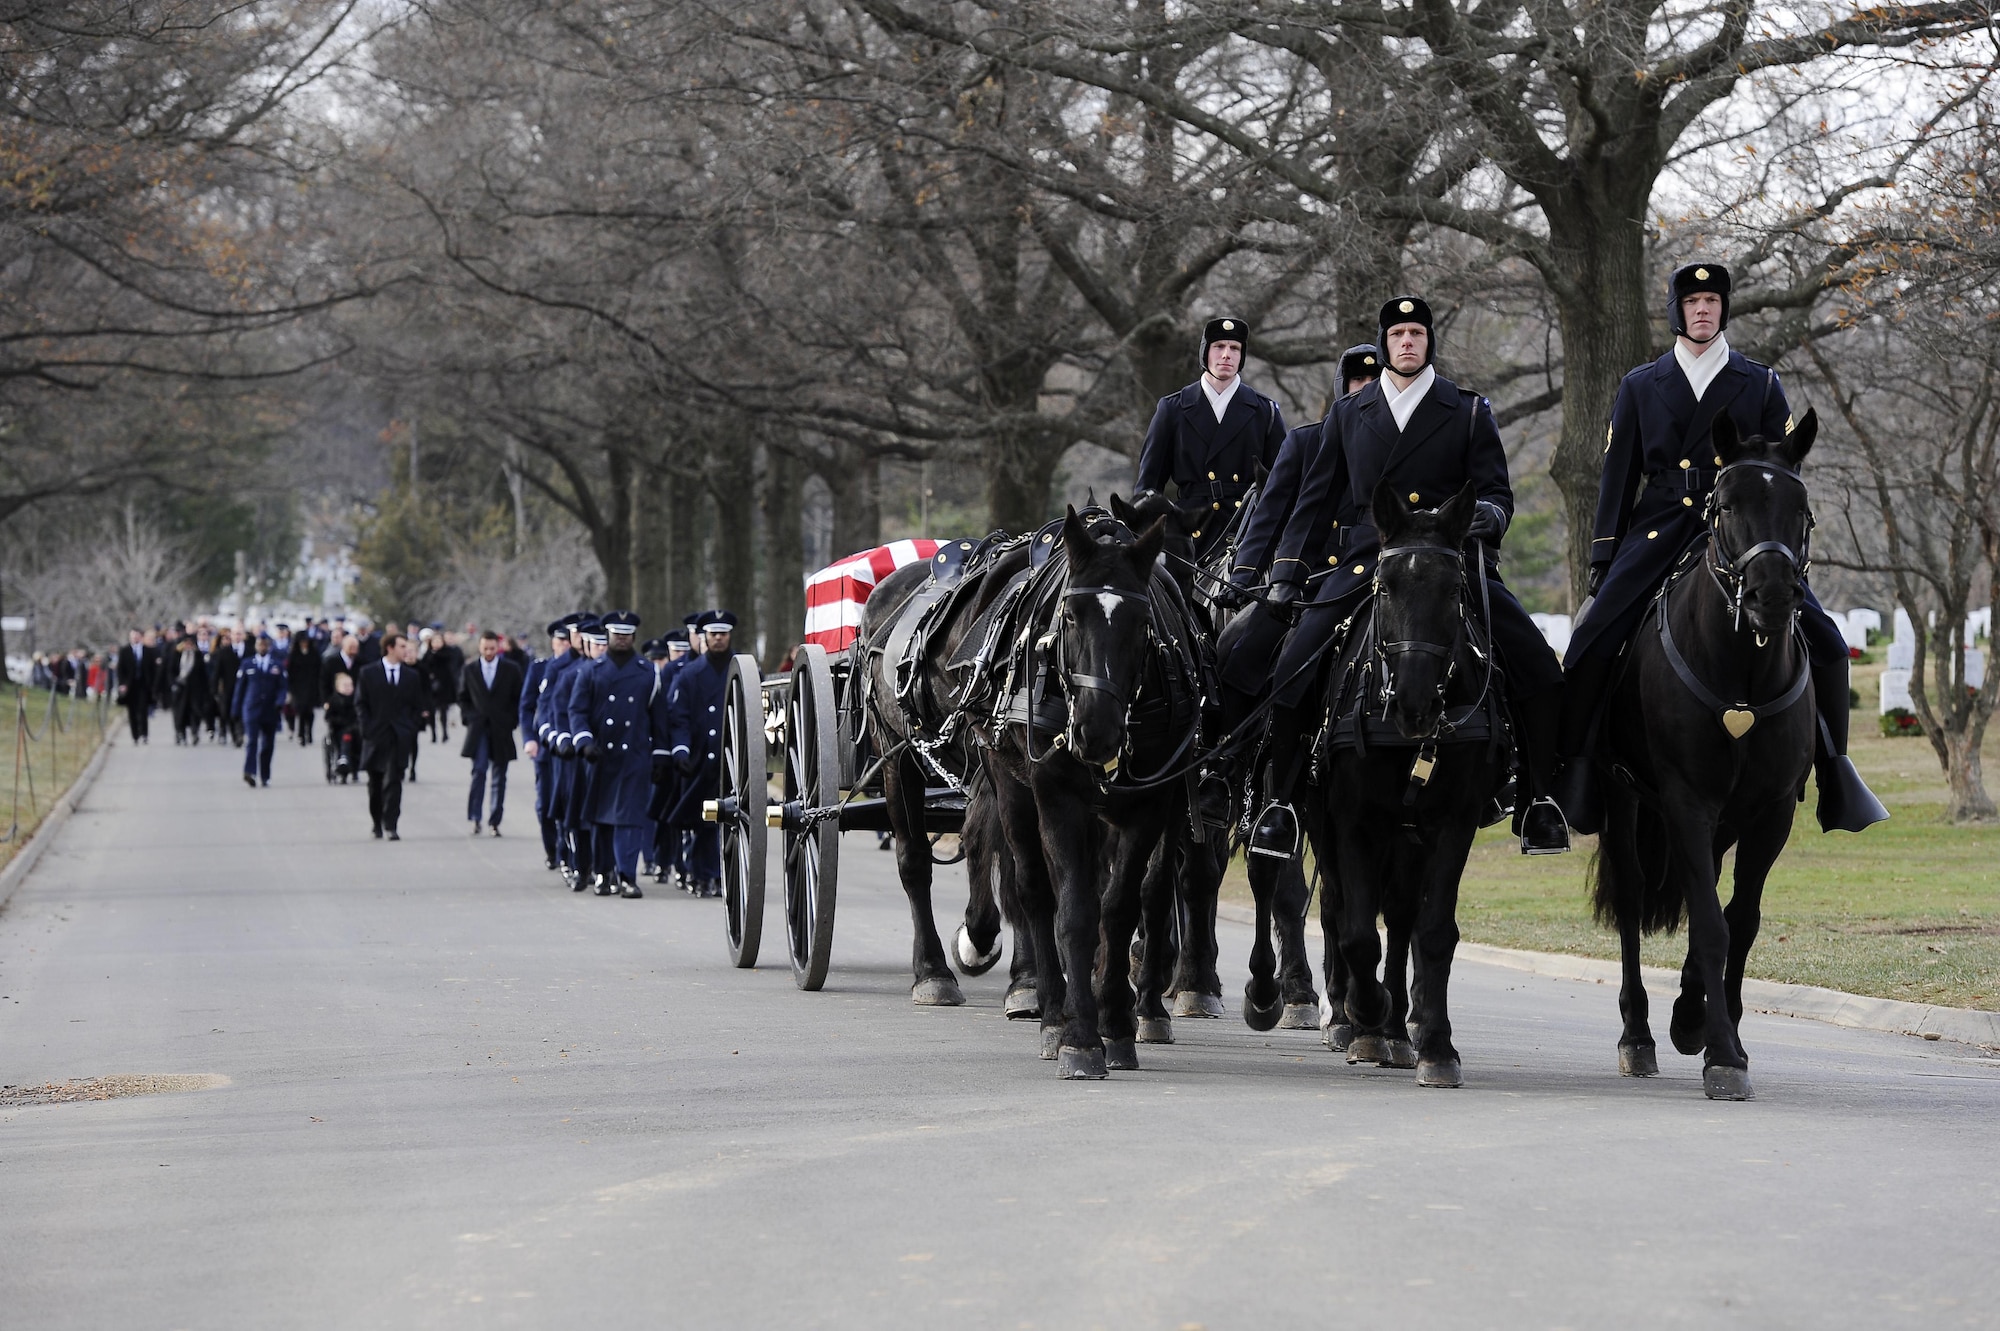 Maj. Troy Gilbert is carried by caisson during his final interment at Arlington National Cemetery, Va., Dec. 19, 2016. Gilbert was killed Nov. 27, 2006, while flying a mission in direct support of coalition ground combat operations when his F-16C Fighting Falcon crashed approximately 20 miles northwest of Baghdad. This was the third interment for the Airman at Arlington since 2006, and reunited remains recovered this year with partial remains originally recovered in 2006 and 2012. (U.S. Air Force photo/Staff Sgt. Jannelle McRae)